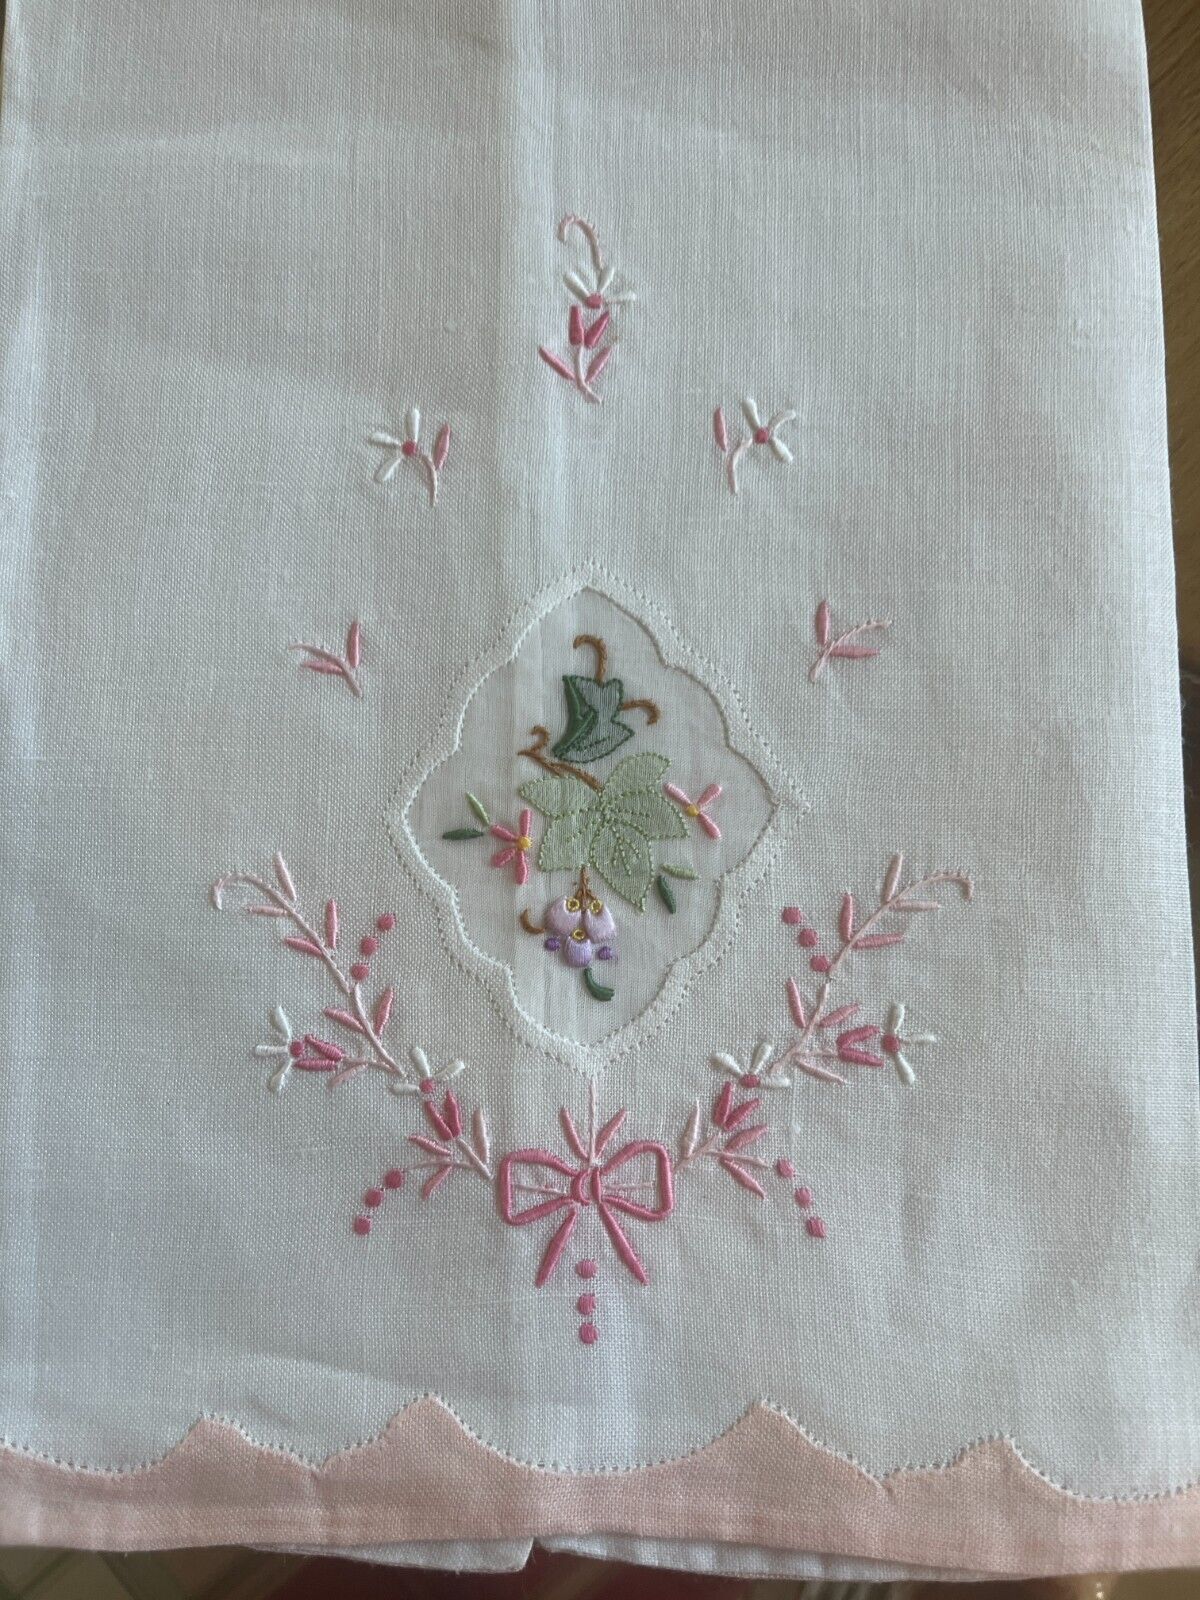 Linen Towel Organdy Flower Applique Embroidered Hand Made Show Pink Edge Vintage